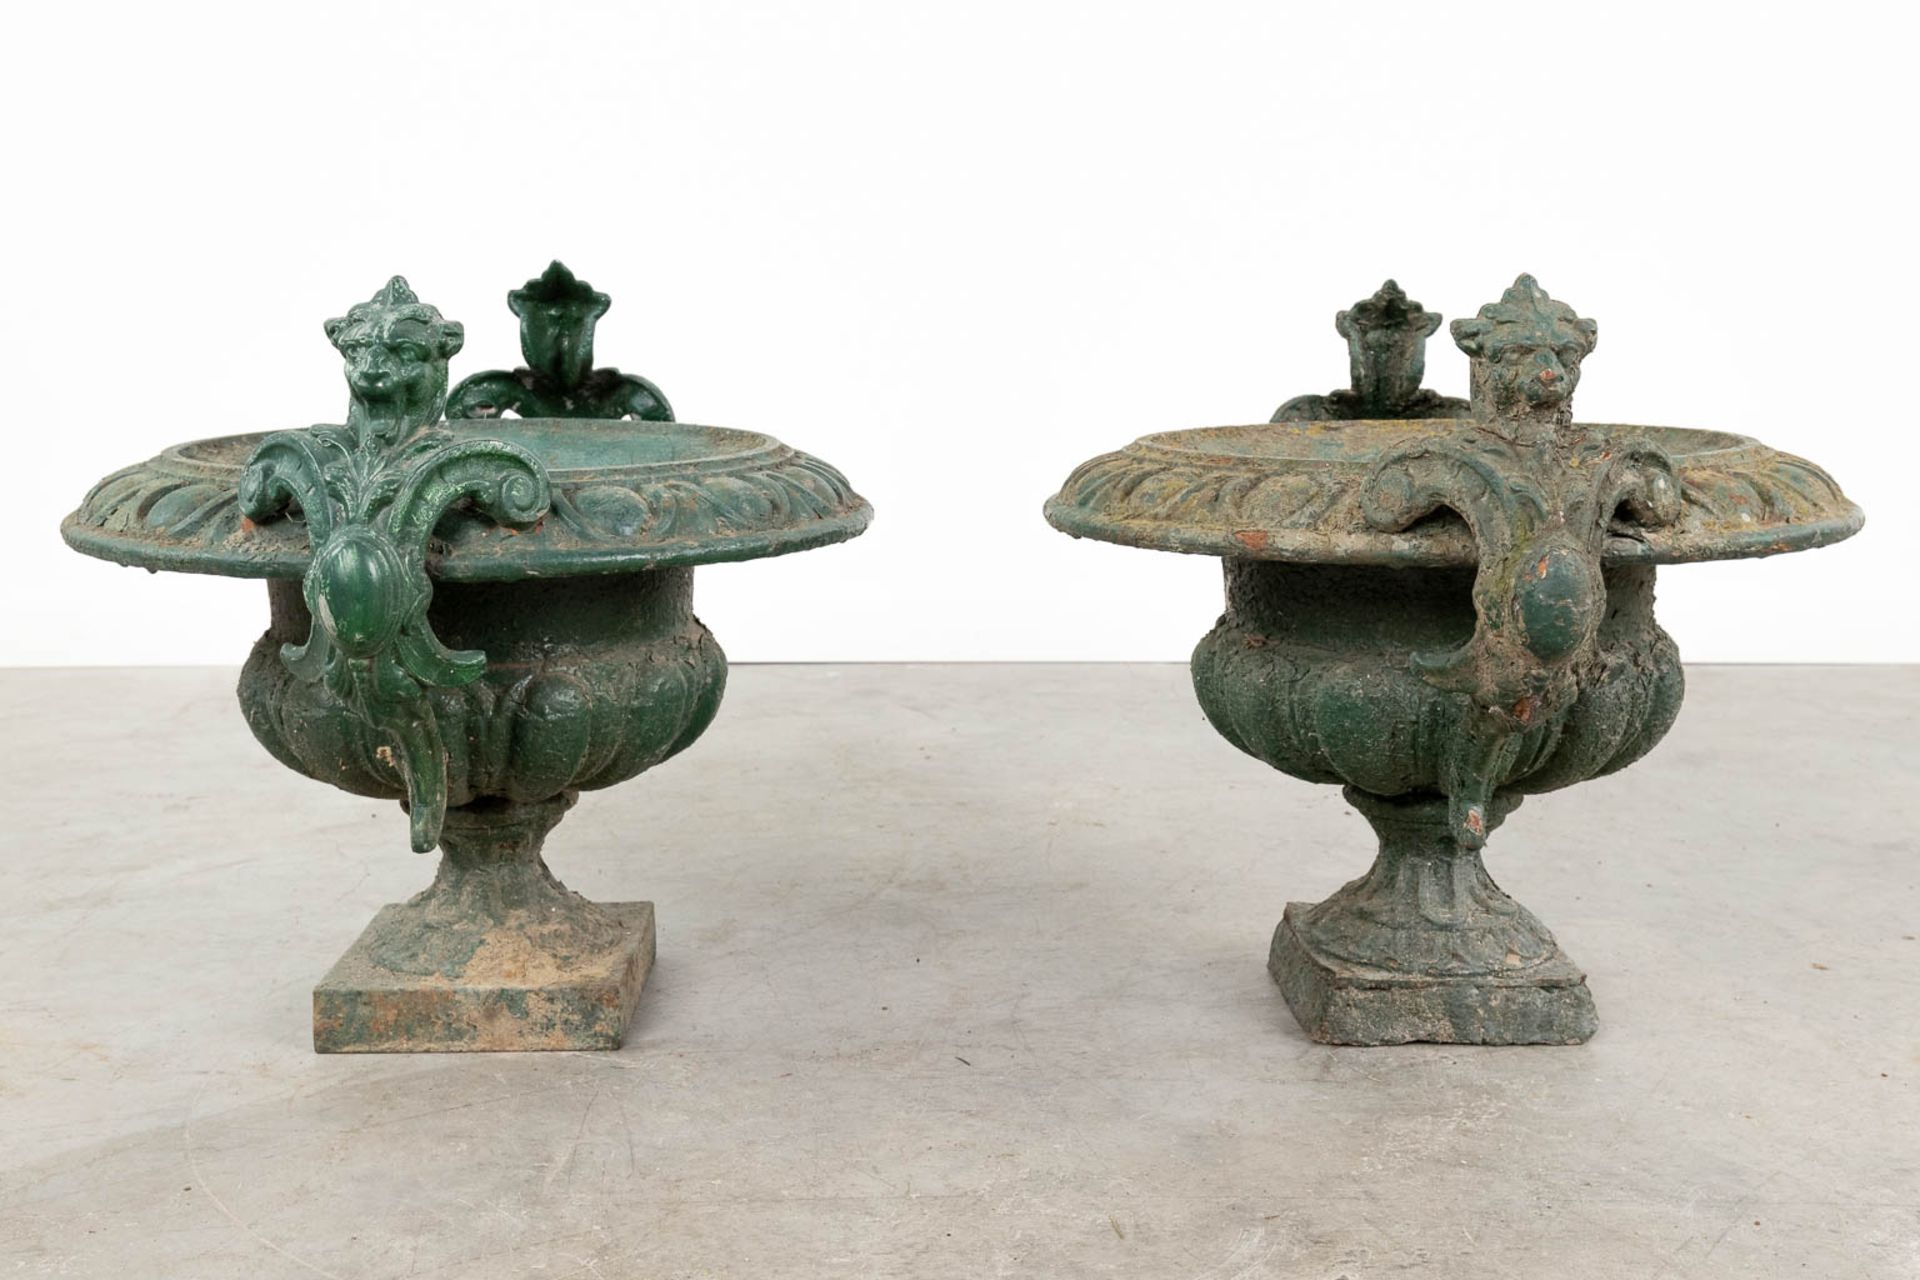 A collection of 3 garden vases, made of cast iron. (L:33 x W:68 x H:34 cm) - Image 4 of 15